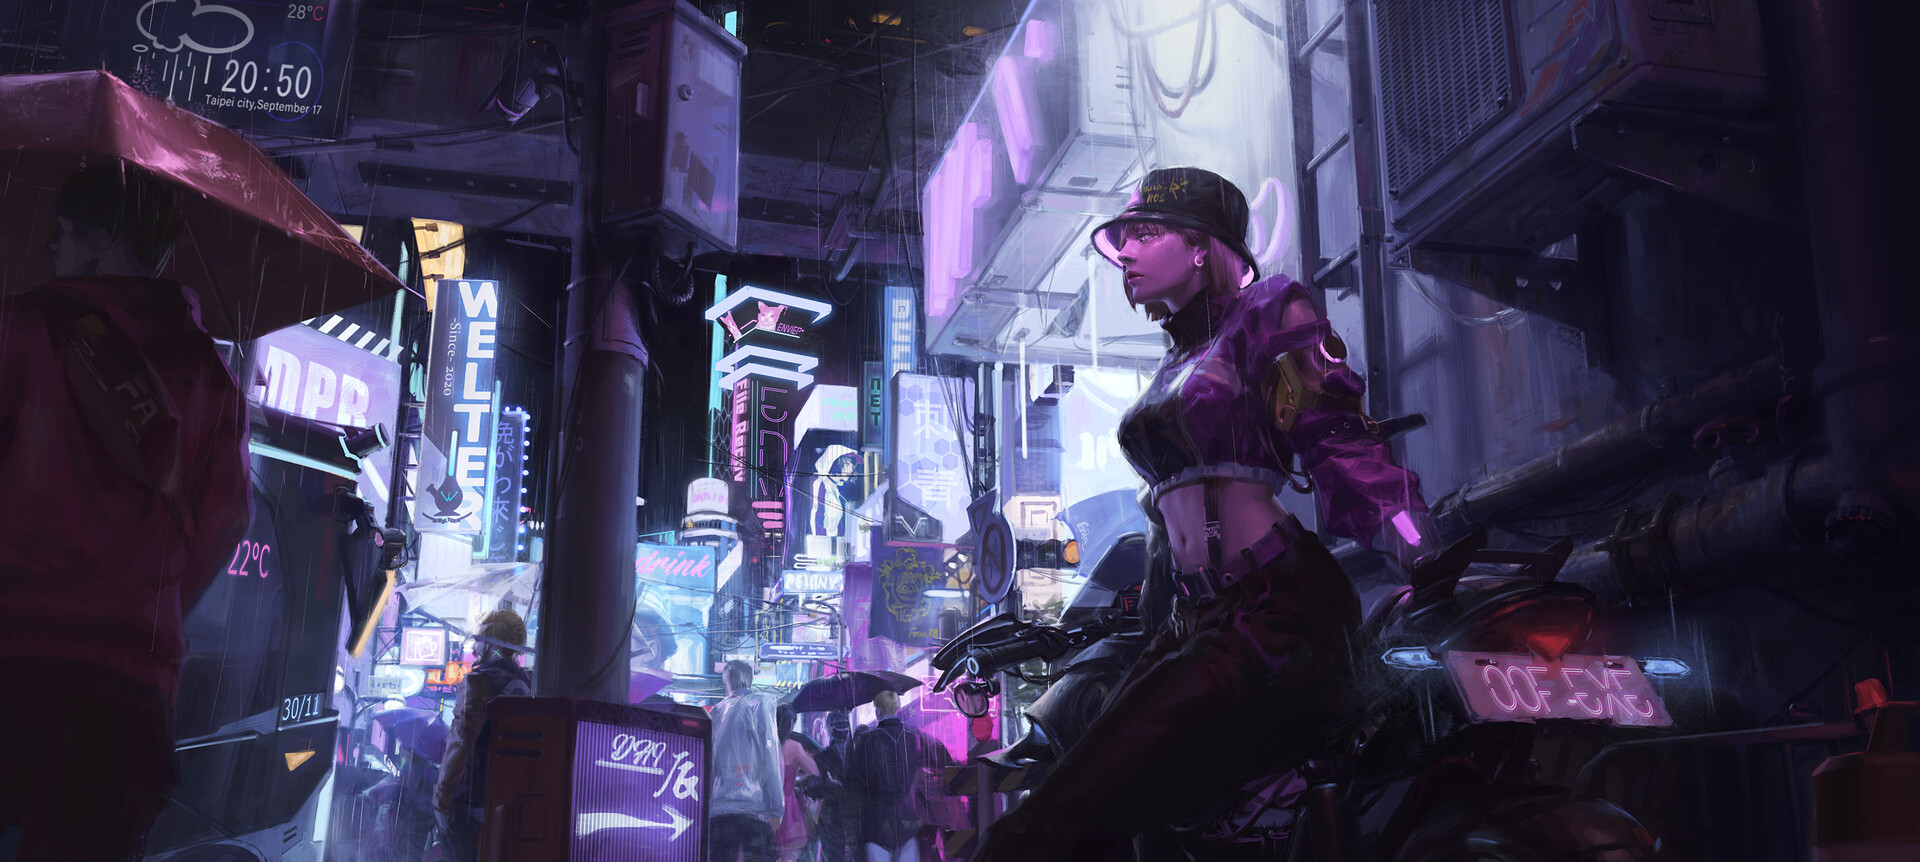 A cybernetic woman looks into the crowd